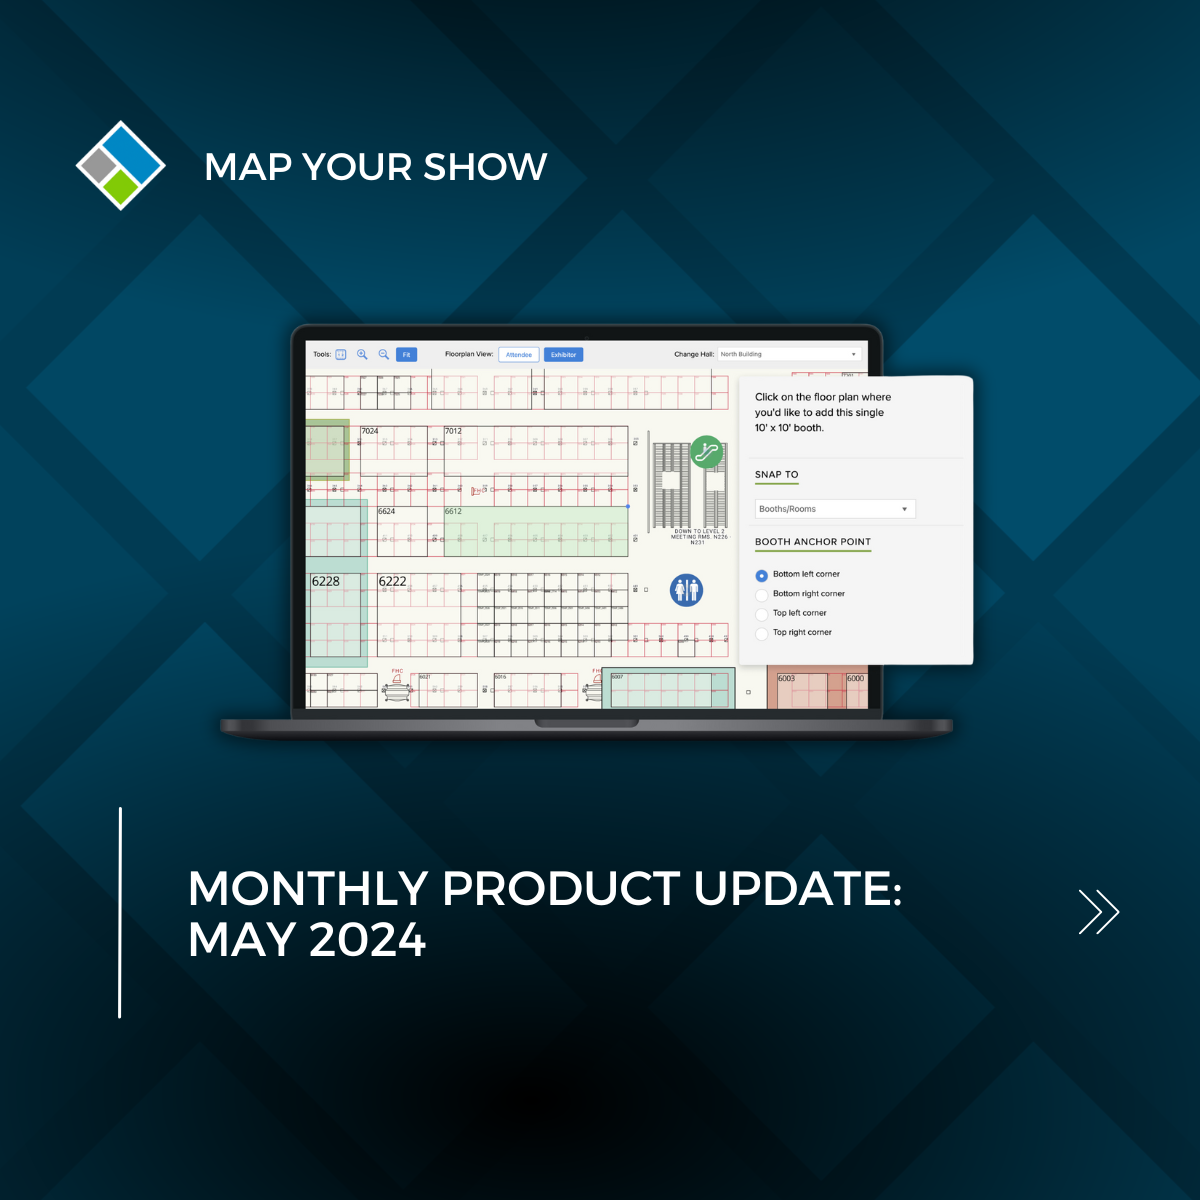 Map Your Show Monthly Product Update: May 2024